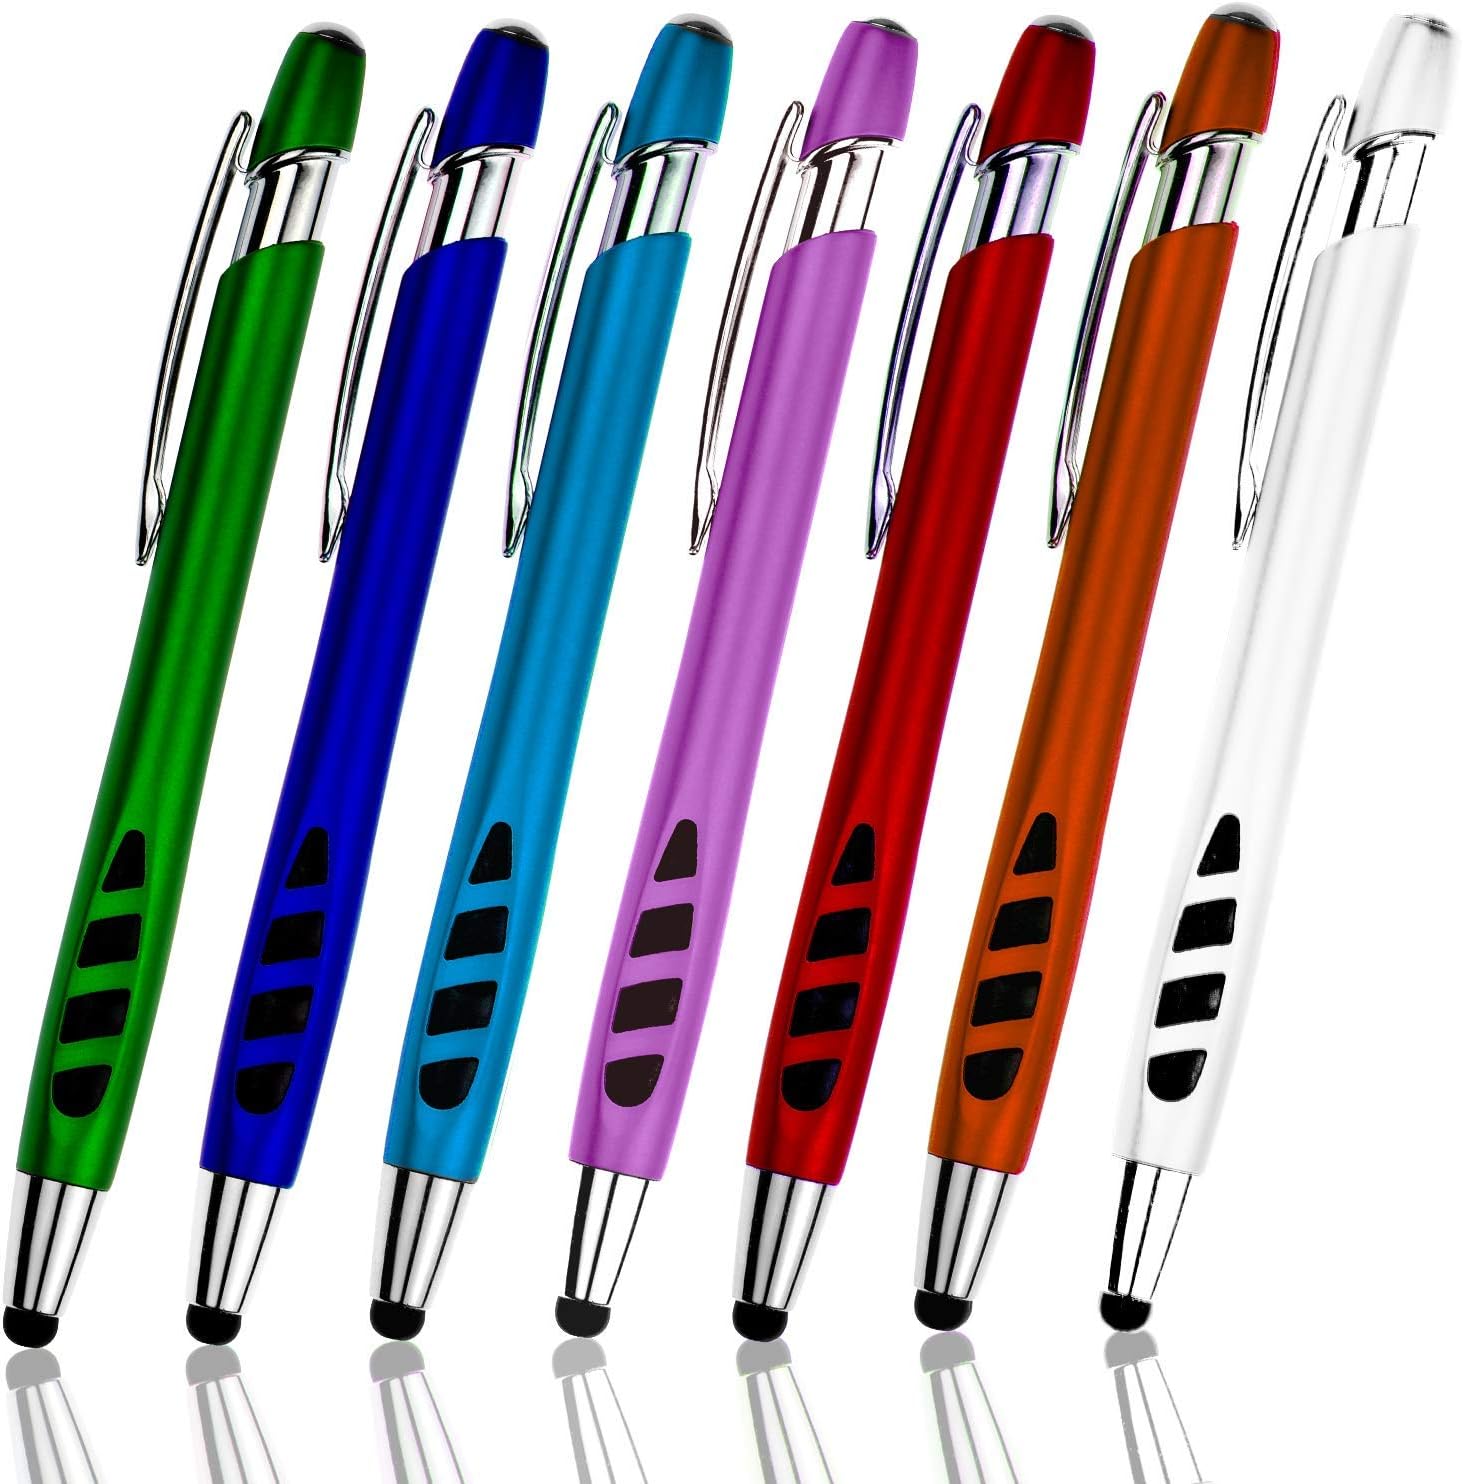 Stylus Pen for Touch Screens & Ballpoint Writing Pens, [...]